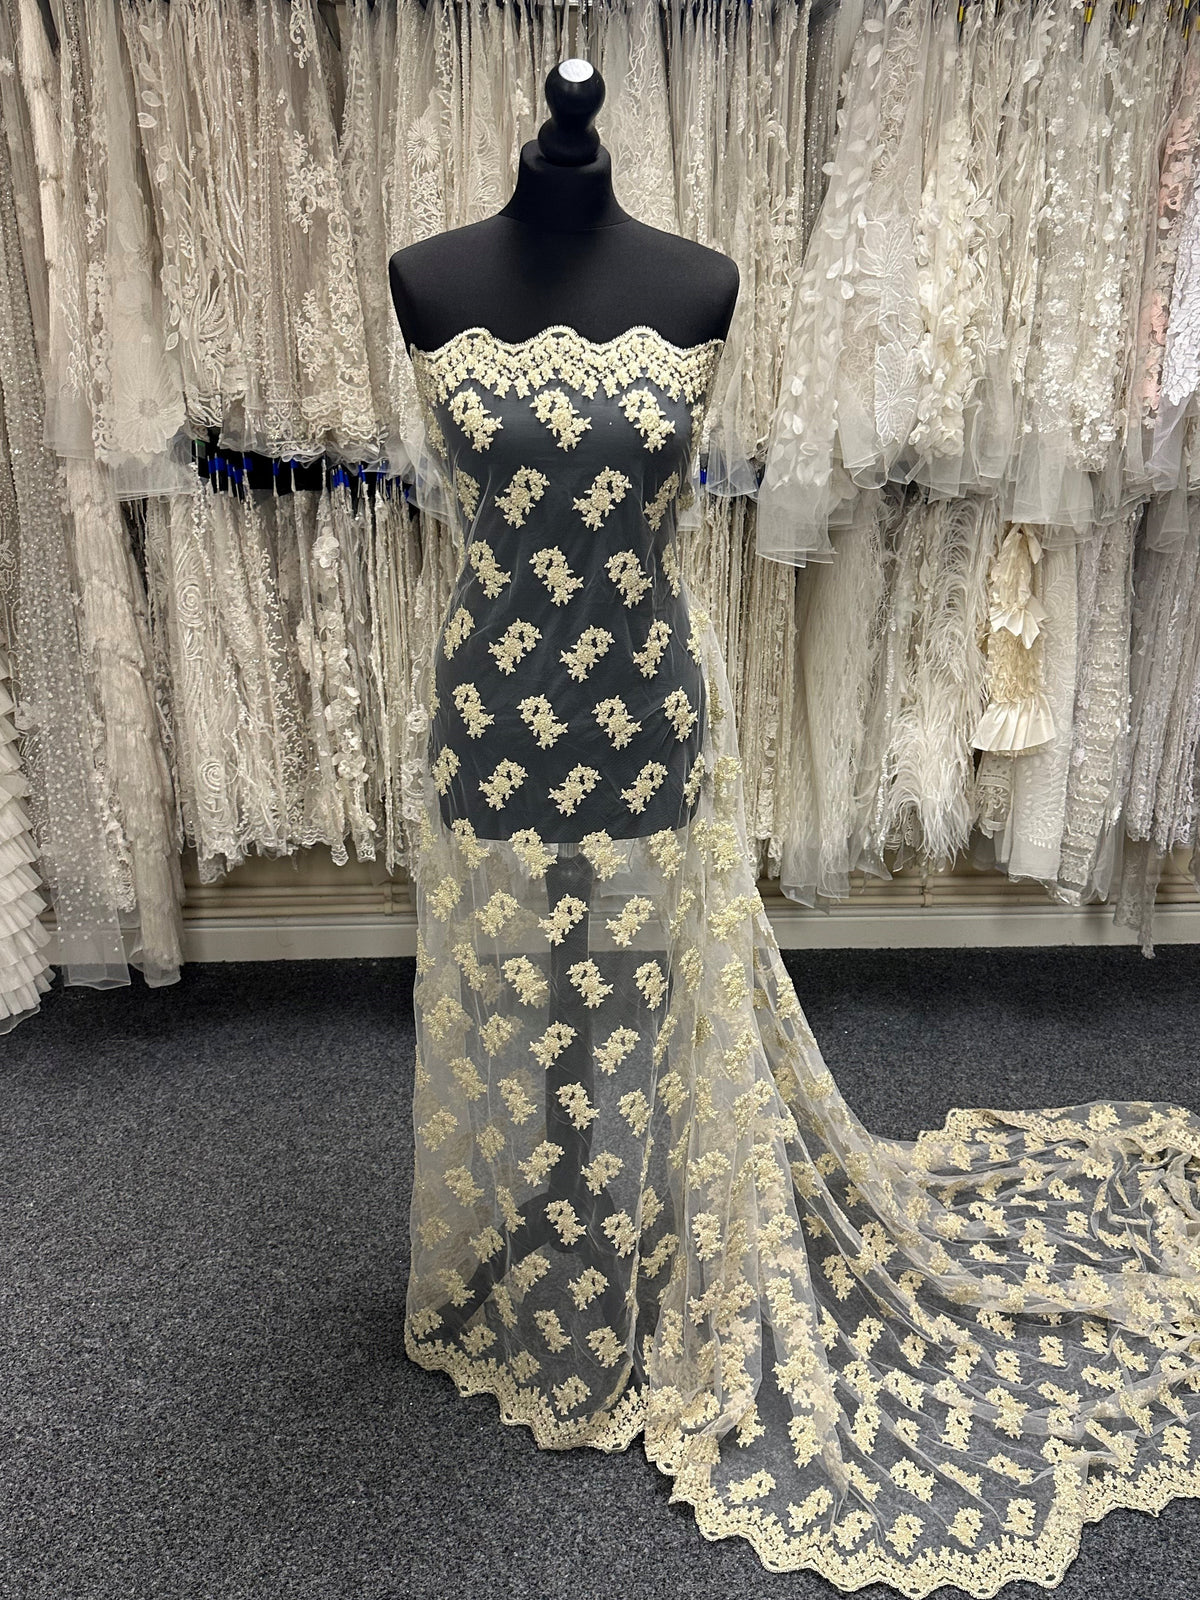 Gold Beaded Lace - Chatterley